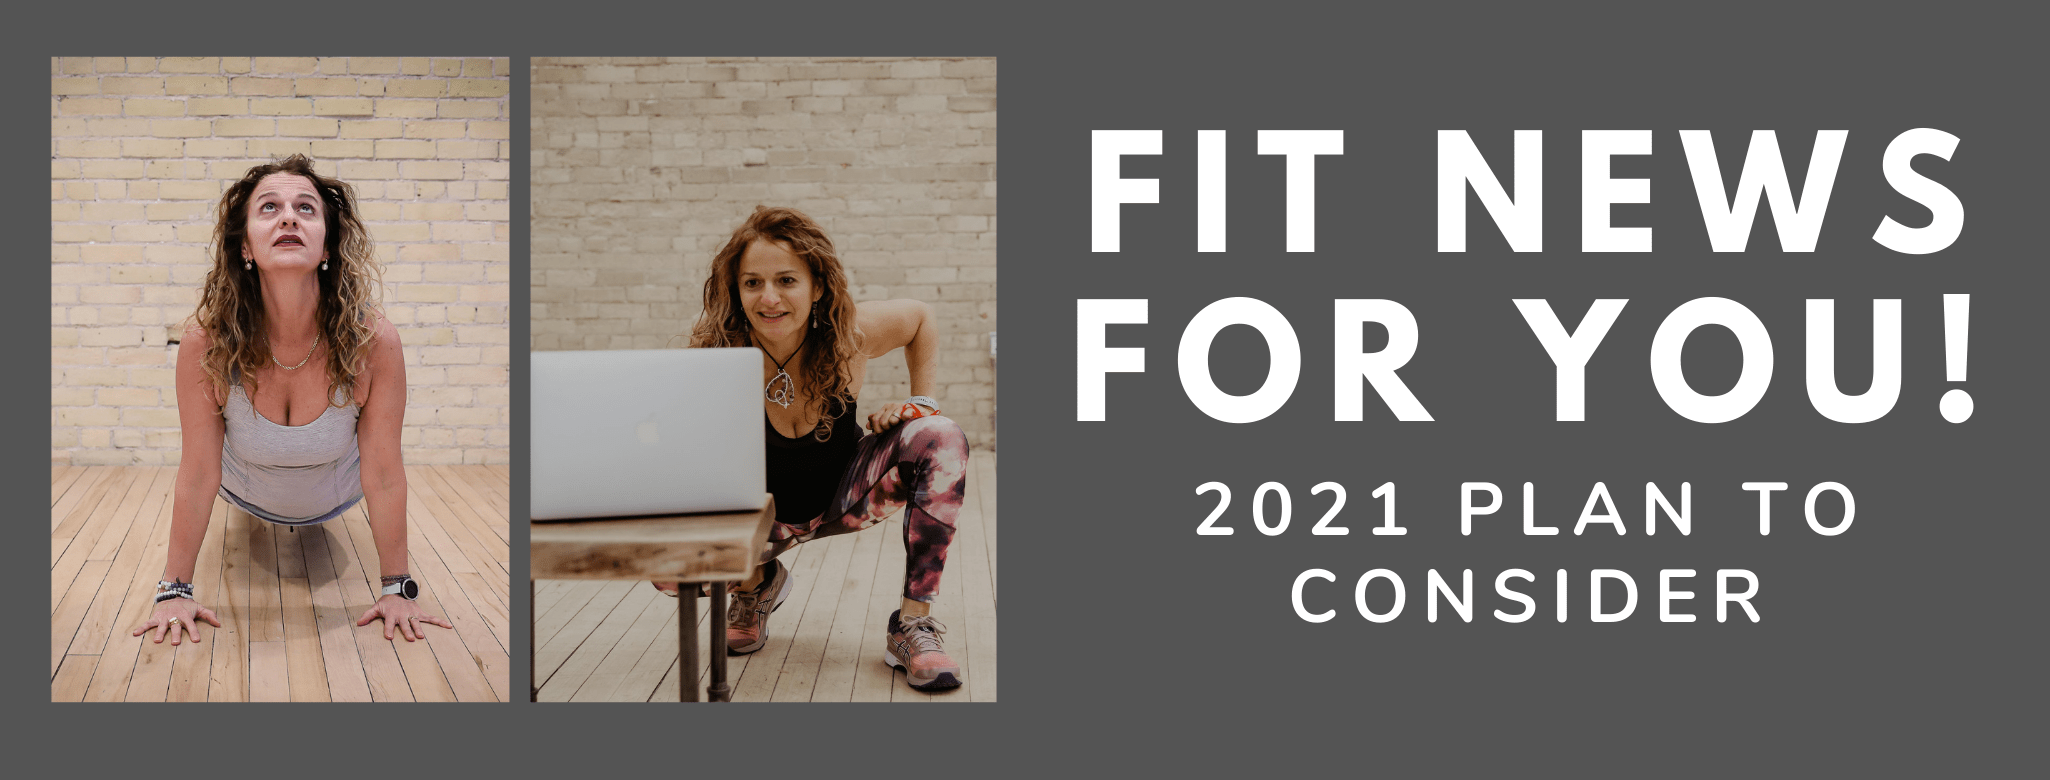 Want something to look forward to? Fit News for You!